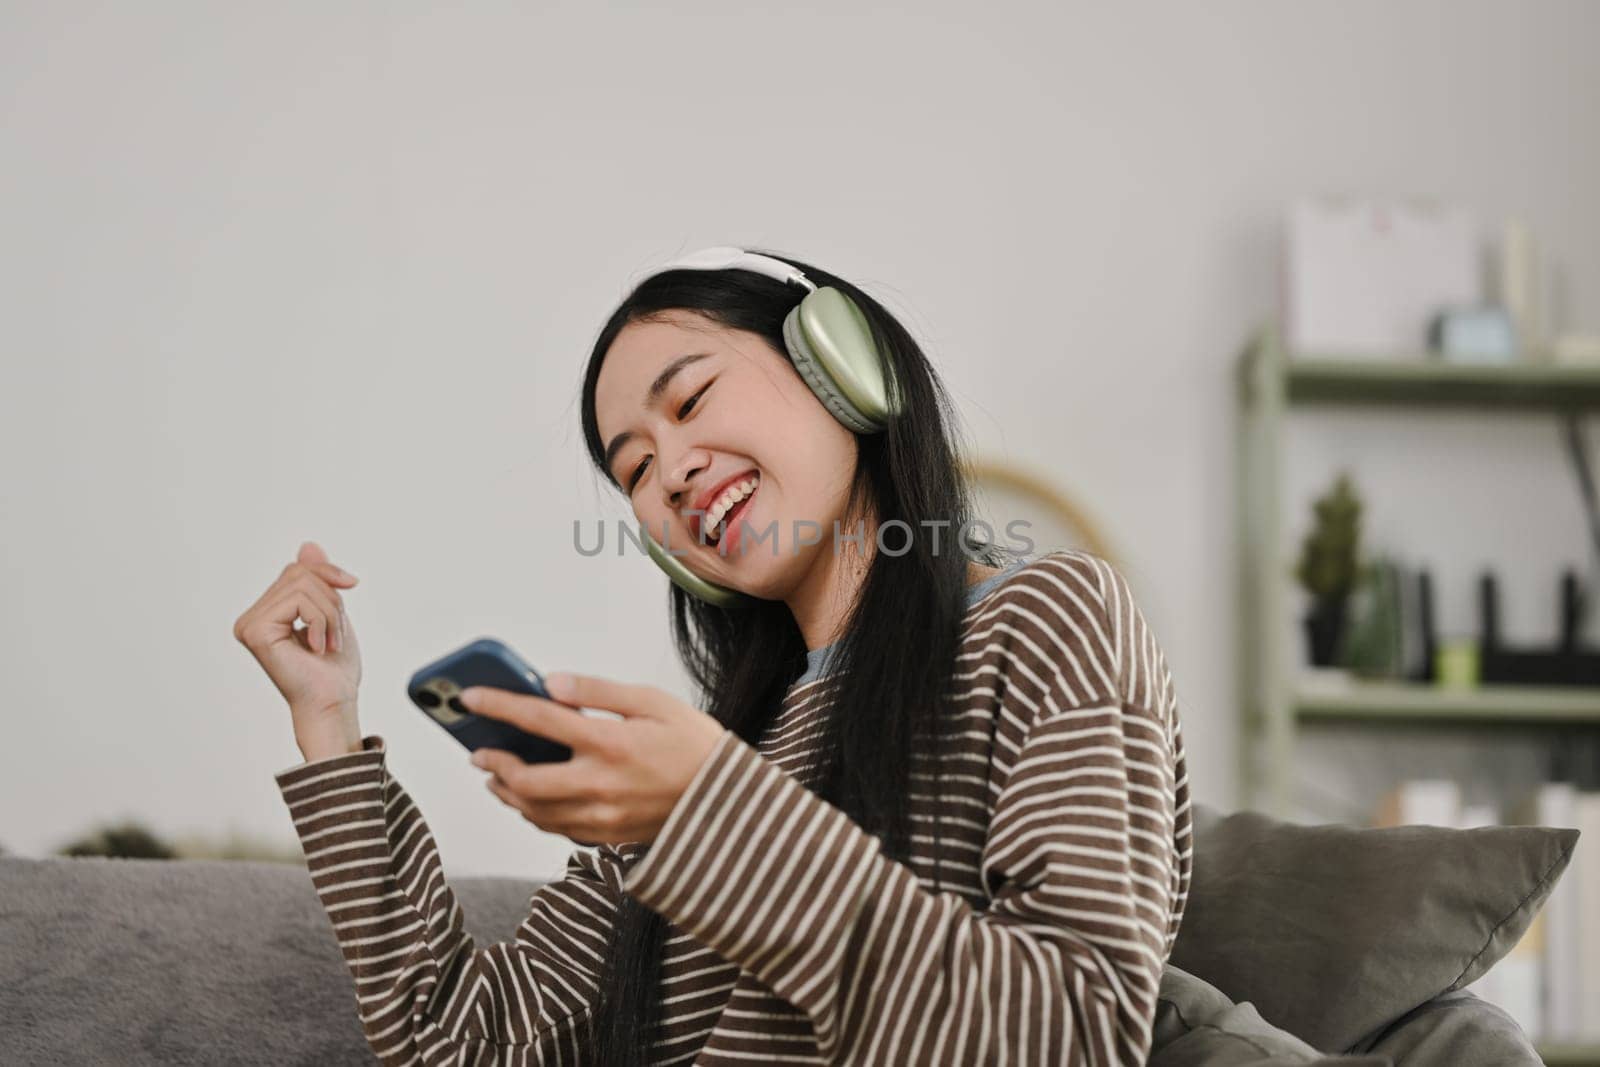 Cheerful young woman enjoying her favorite music playlist, singing and dancing at home.